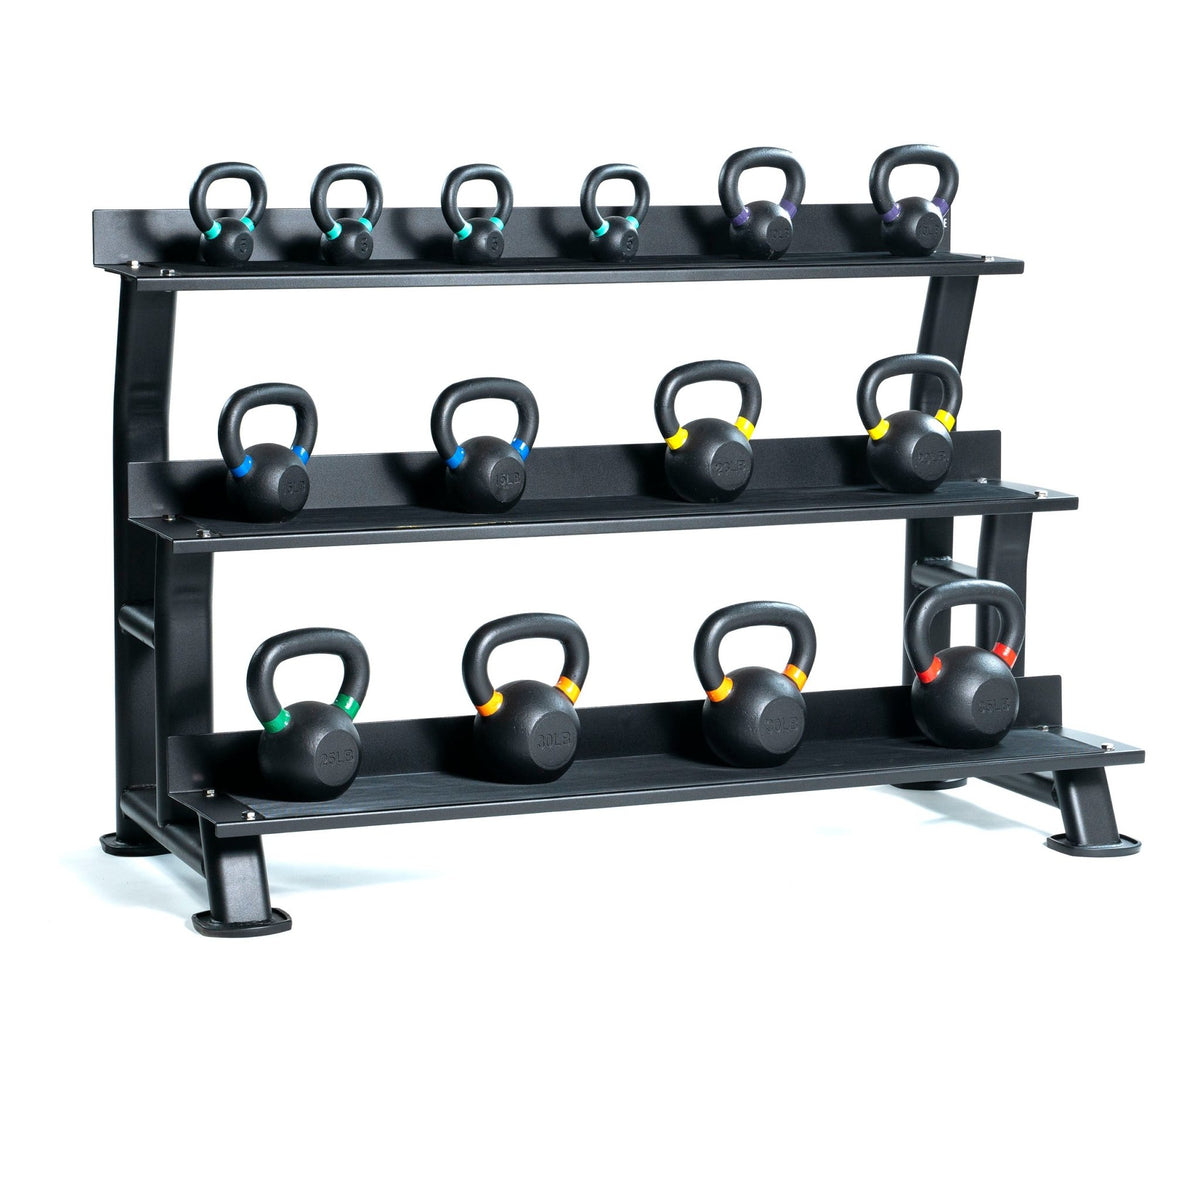 FitWay Equip. Kettlebell Rack - Three Tier - Fitness Experience